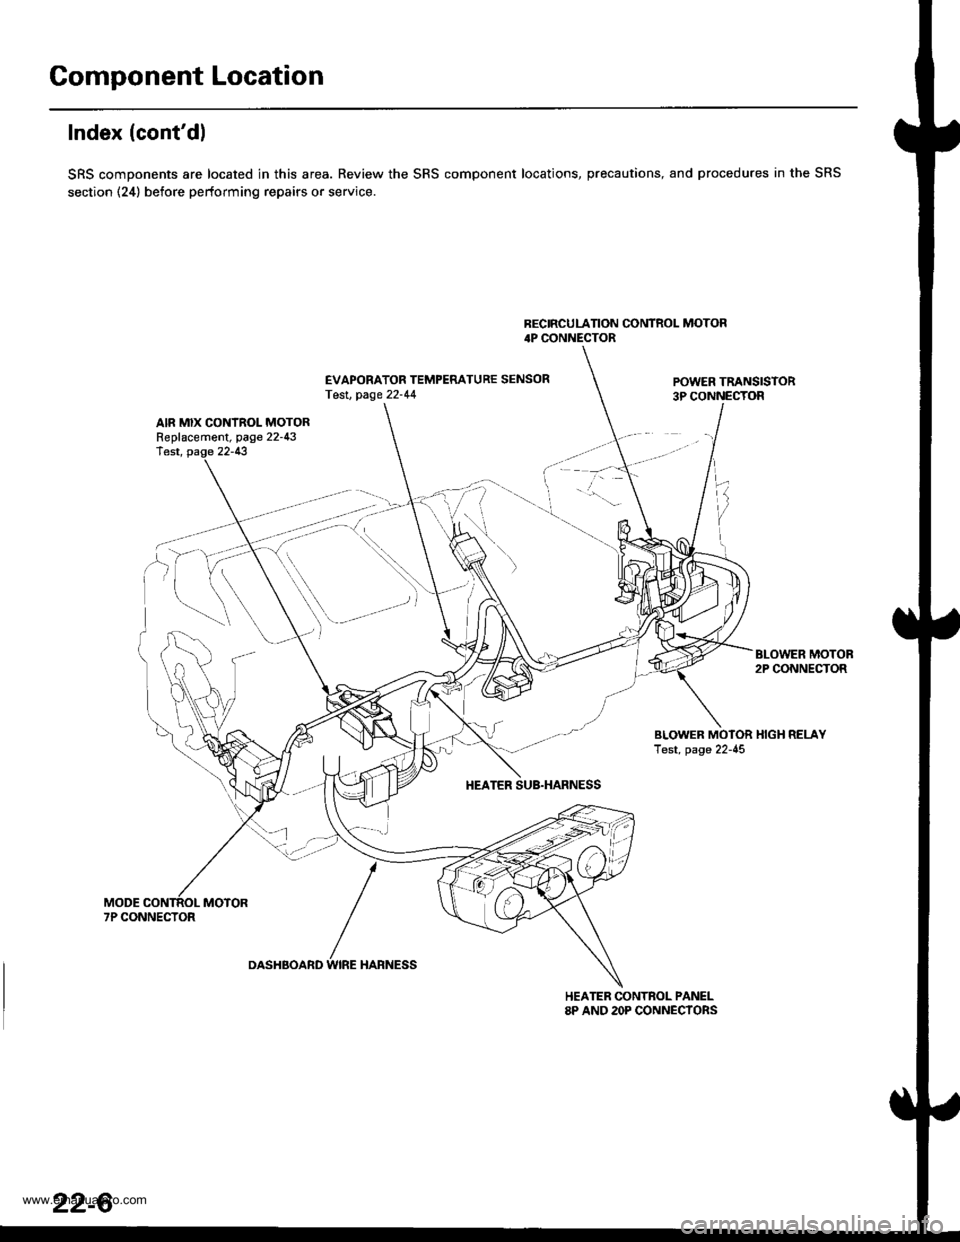 HONDA CR-V 1997 RD1-RD3 / 1.G Workshop Manual 
Component Location
Index (contdl
SRS components are located in this area. Review the SRS component locations, precautions, and procedures in the SRS
section (24) before performing repairs or service